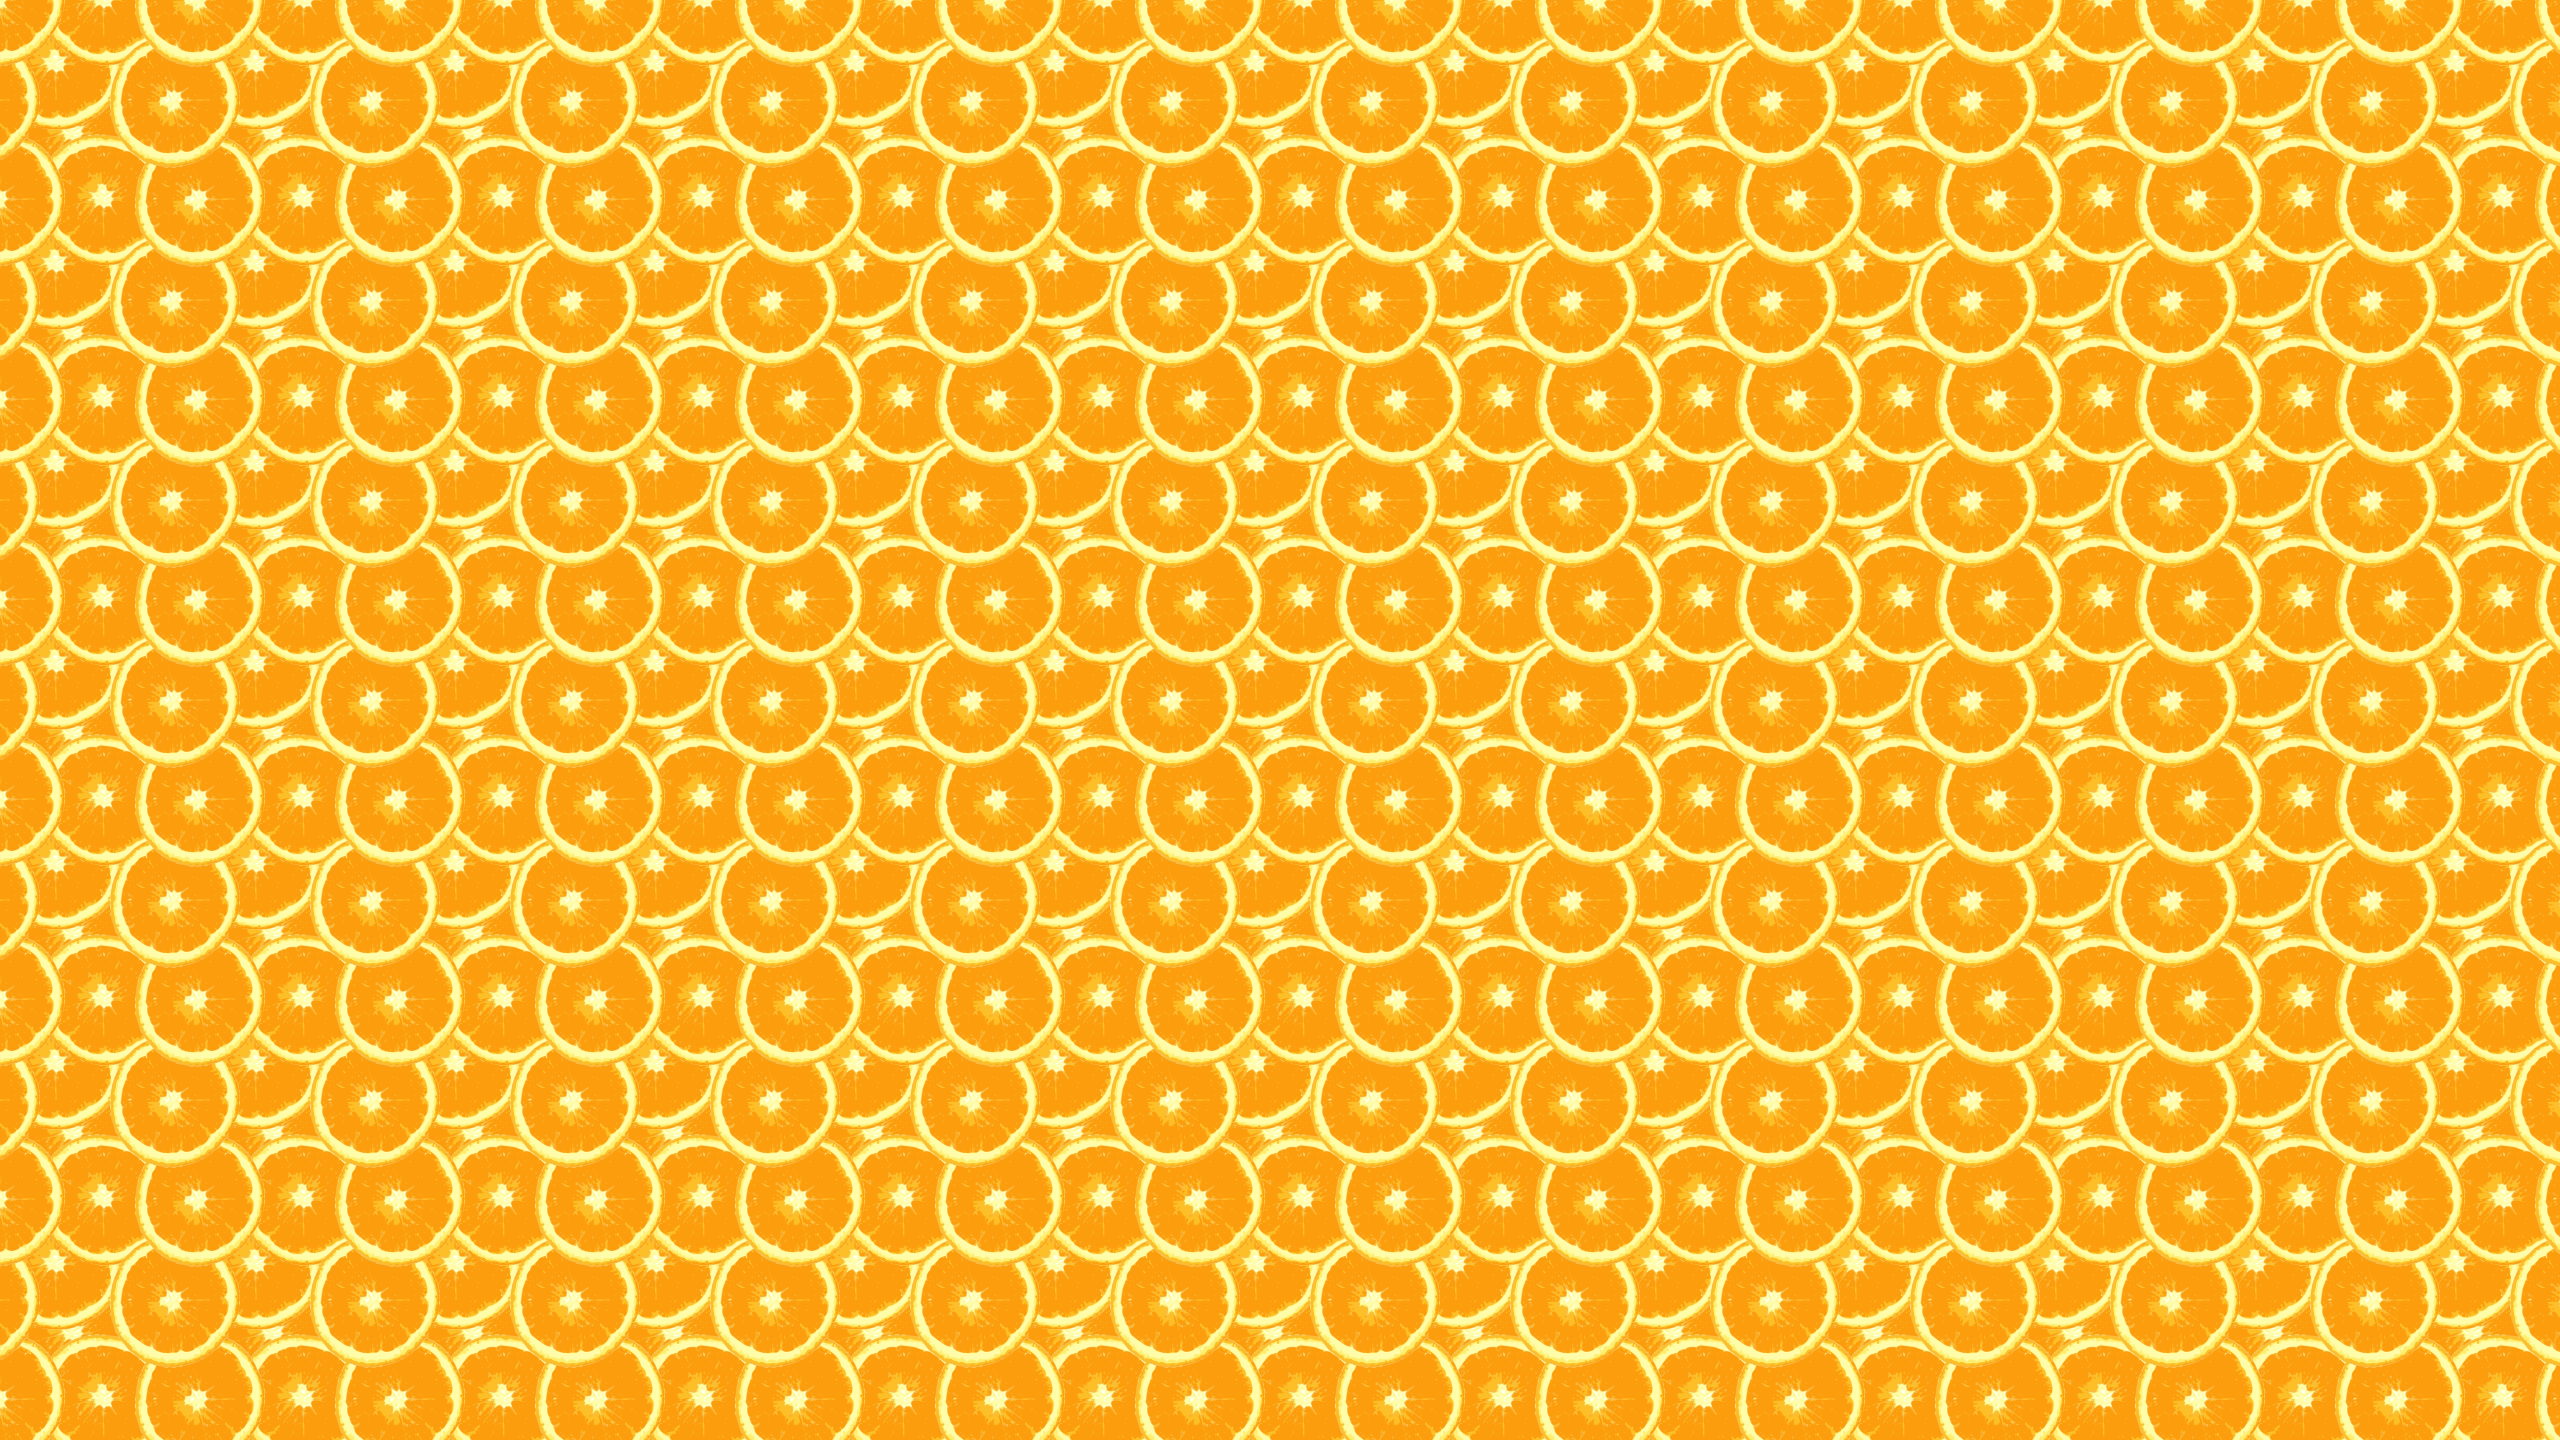 Free download this Orange Slices Desktop Wallpaper is easy Just save the wallpaper [2560x1440] for your Desktop, Mobile & Tablet. Explore Orange Desktop Wallpaper. Cool Orange Wallpaper, Wallpaper Orange